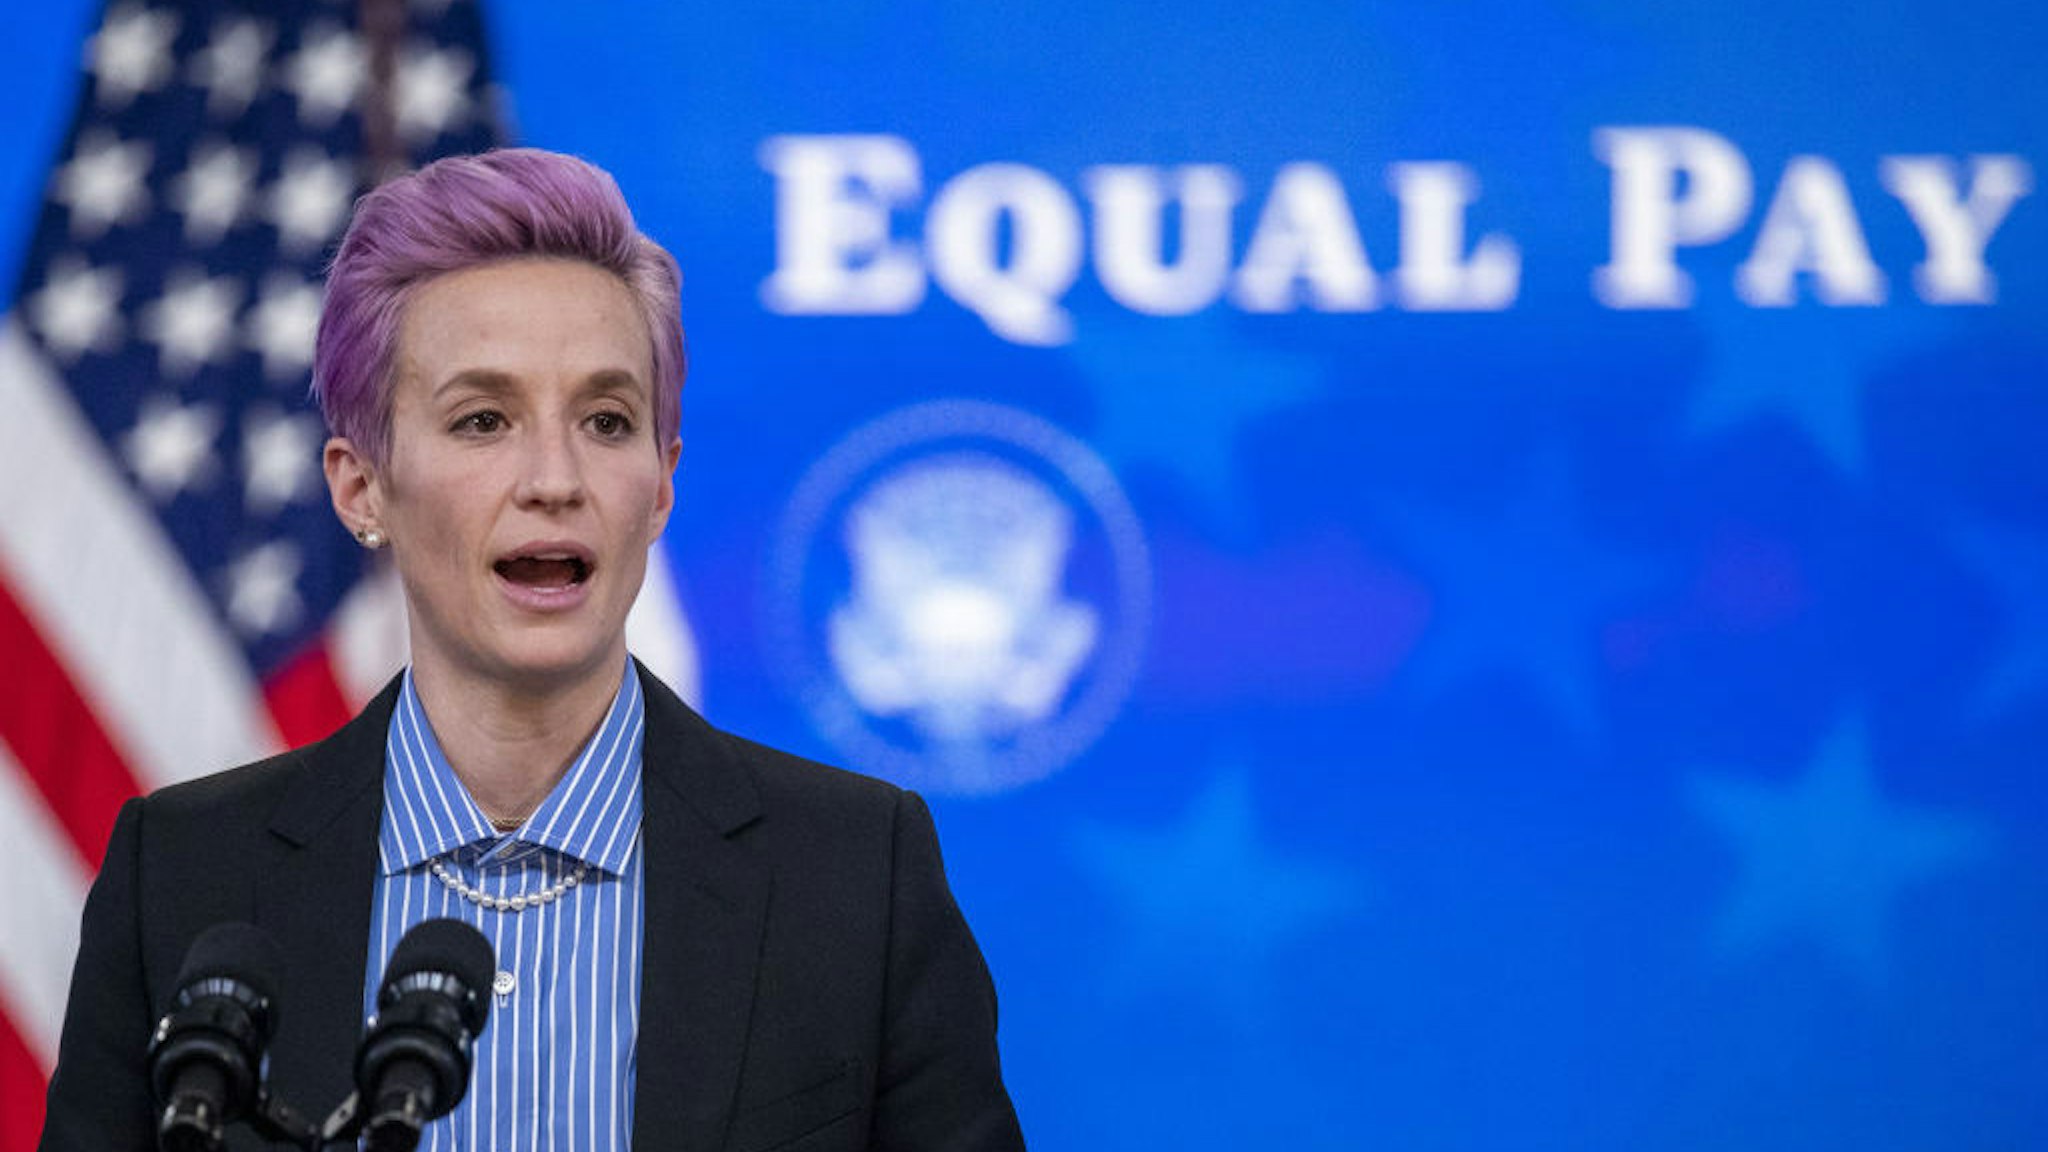 Megan Rapinoe, player with the U.S. Women's National Soccer Team, speaks during an event marking Equal Pay Day in the Eisenhower Executive Office Building in Washington, D.C., U.S., on Wednesday, March 24, 2021. The Biden administration has signaled plans to strengthen gender equity at a time when women in the U.S. are disproportionately exiting the workforce compared with men during the Covid-19 pandemic, and are paid about 82 cents on the dollar compared with men. Photographer: Shawn Thew/EPA/Bloomberg